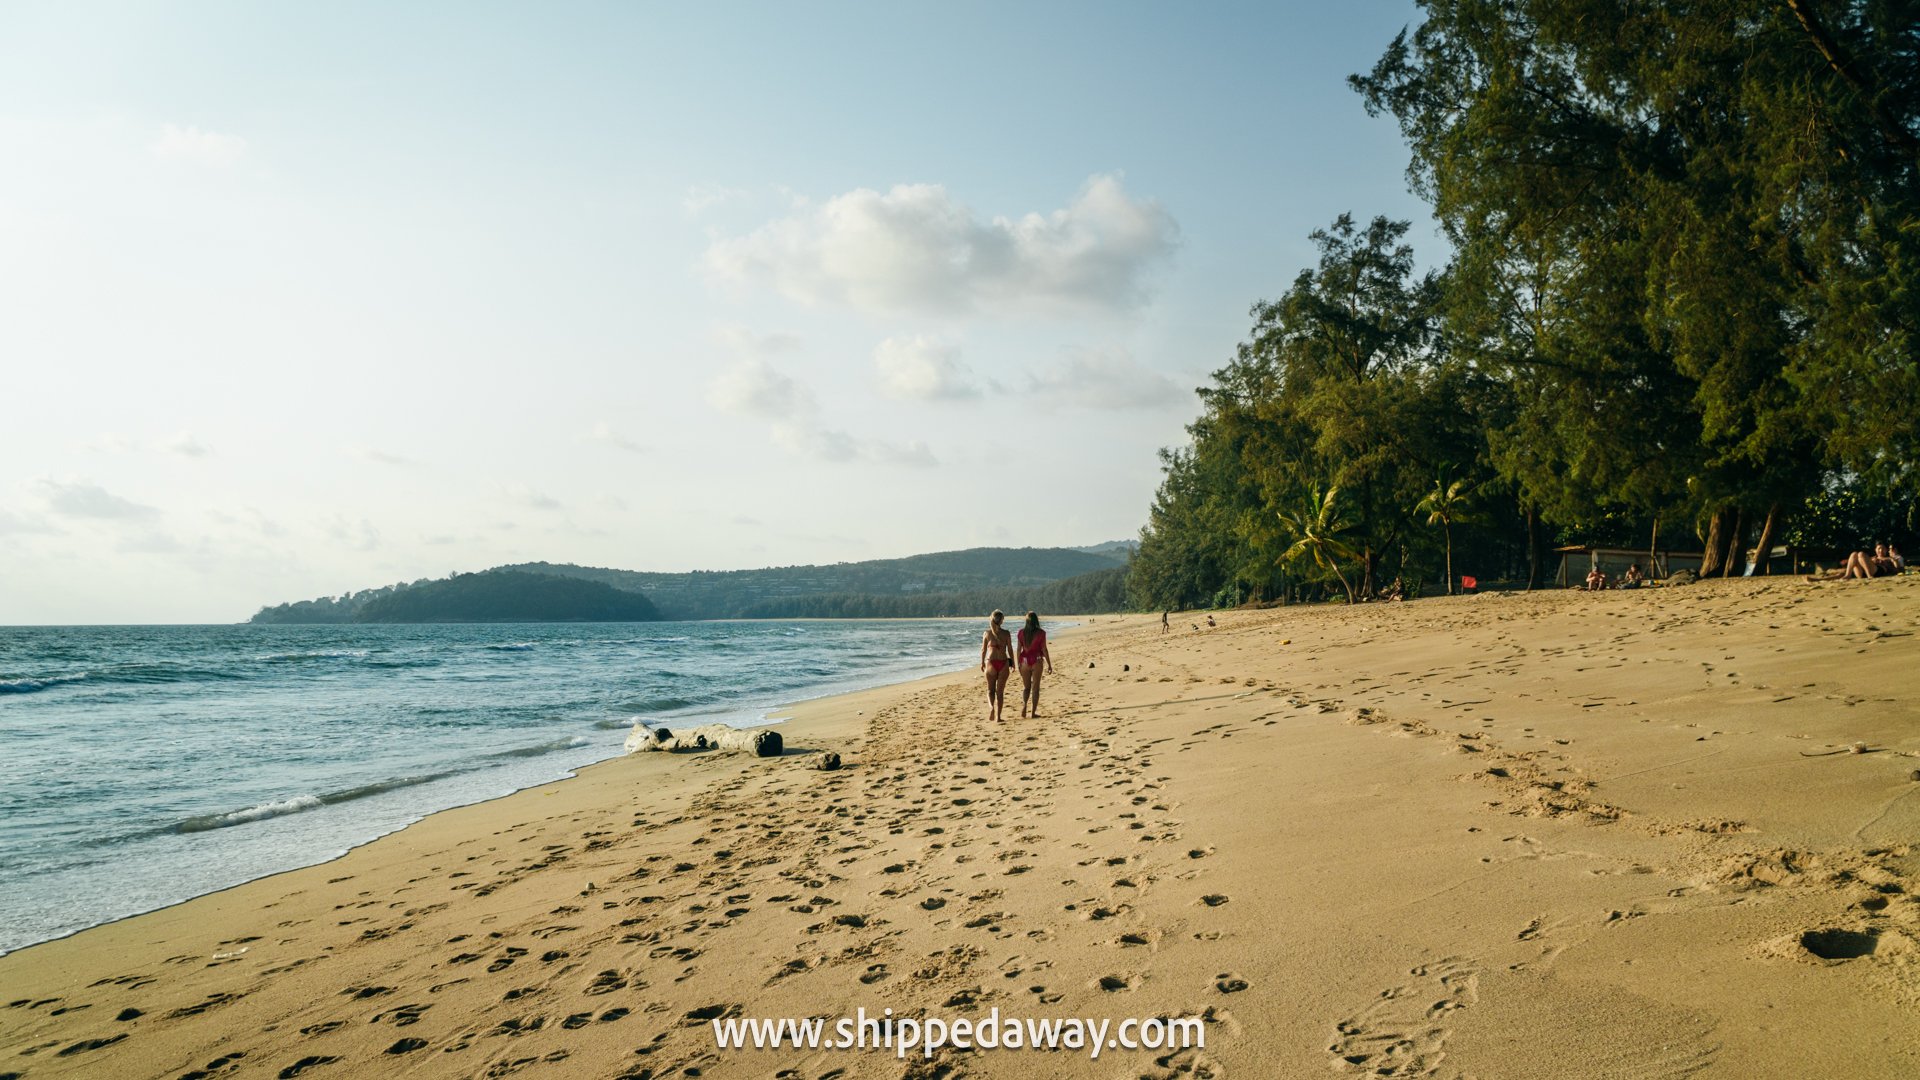 Bang Tao Beach - where to stay in Phuket, best places to stay in Phuket, best areas to stay in Phuket, best Phuket hotels, best hotels in Phuket, best resorts in Phuket, best Phuket resorts, best Phuket hostels, budget stays in Phuket, Phuket budget accommodation, sunny day on the Bang Tao Beach